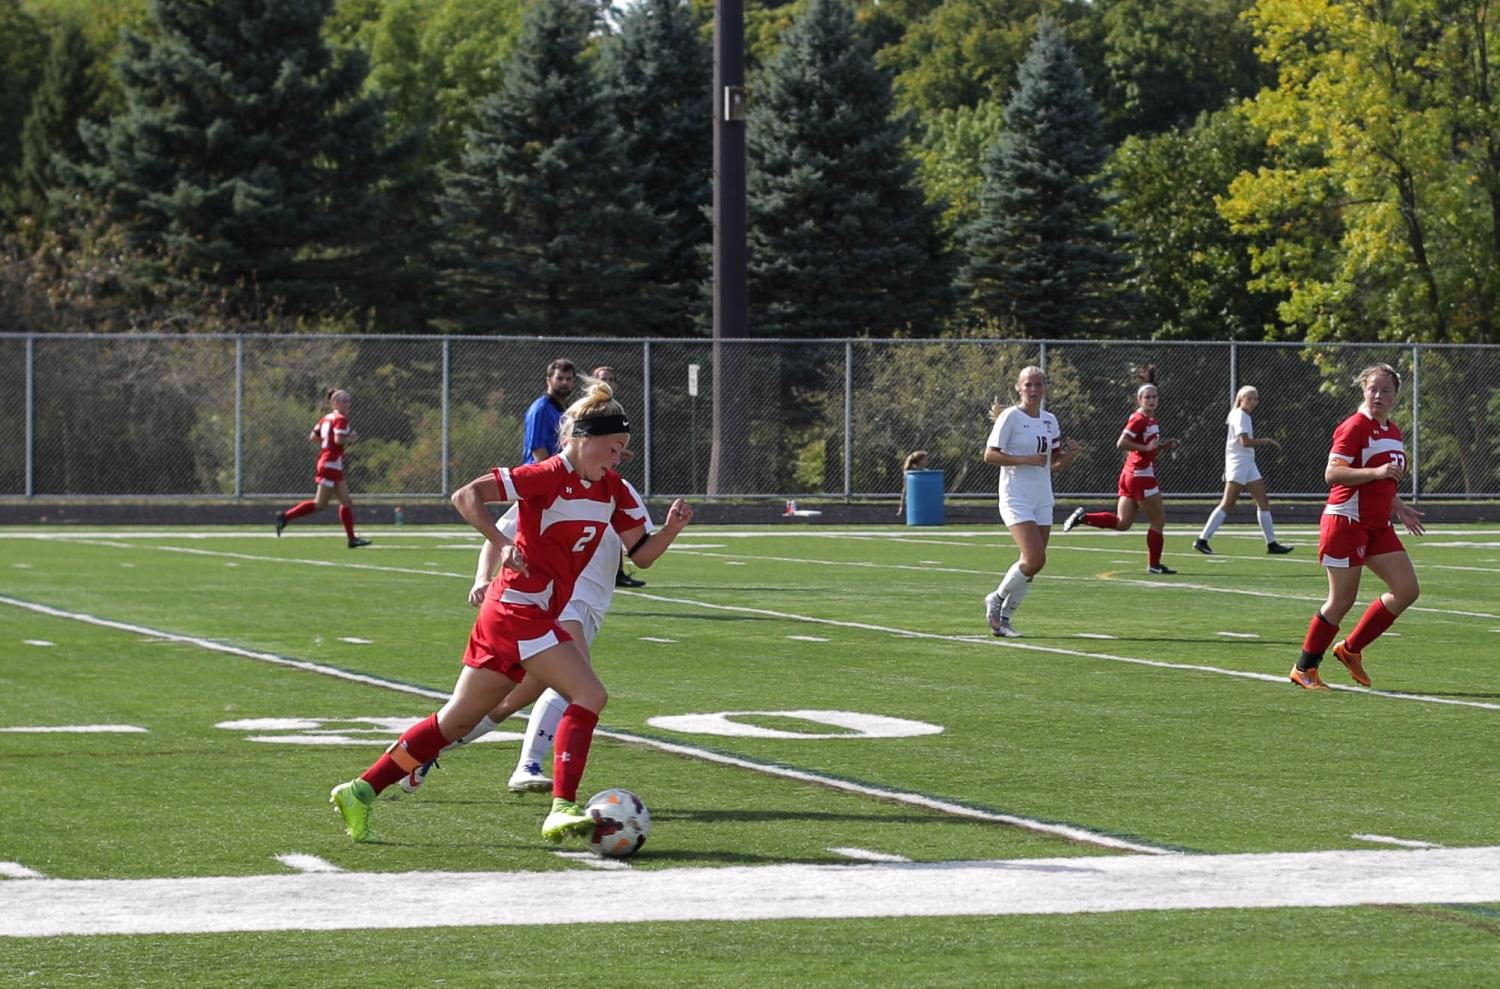 Senior captain Maddie Stoks dribbles past a defender in a recent game.